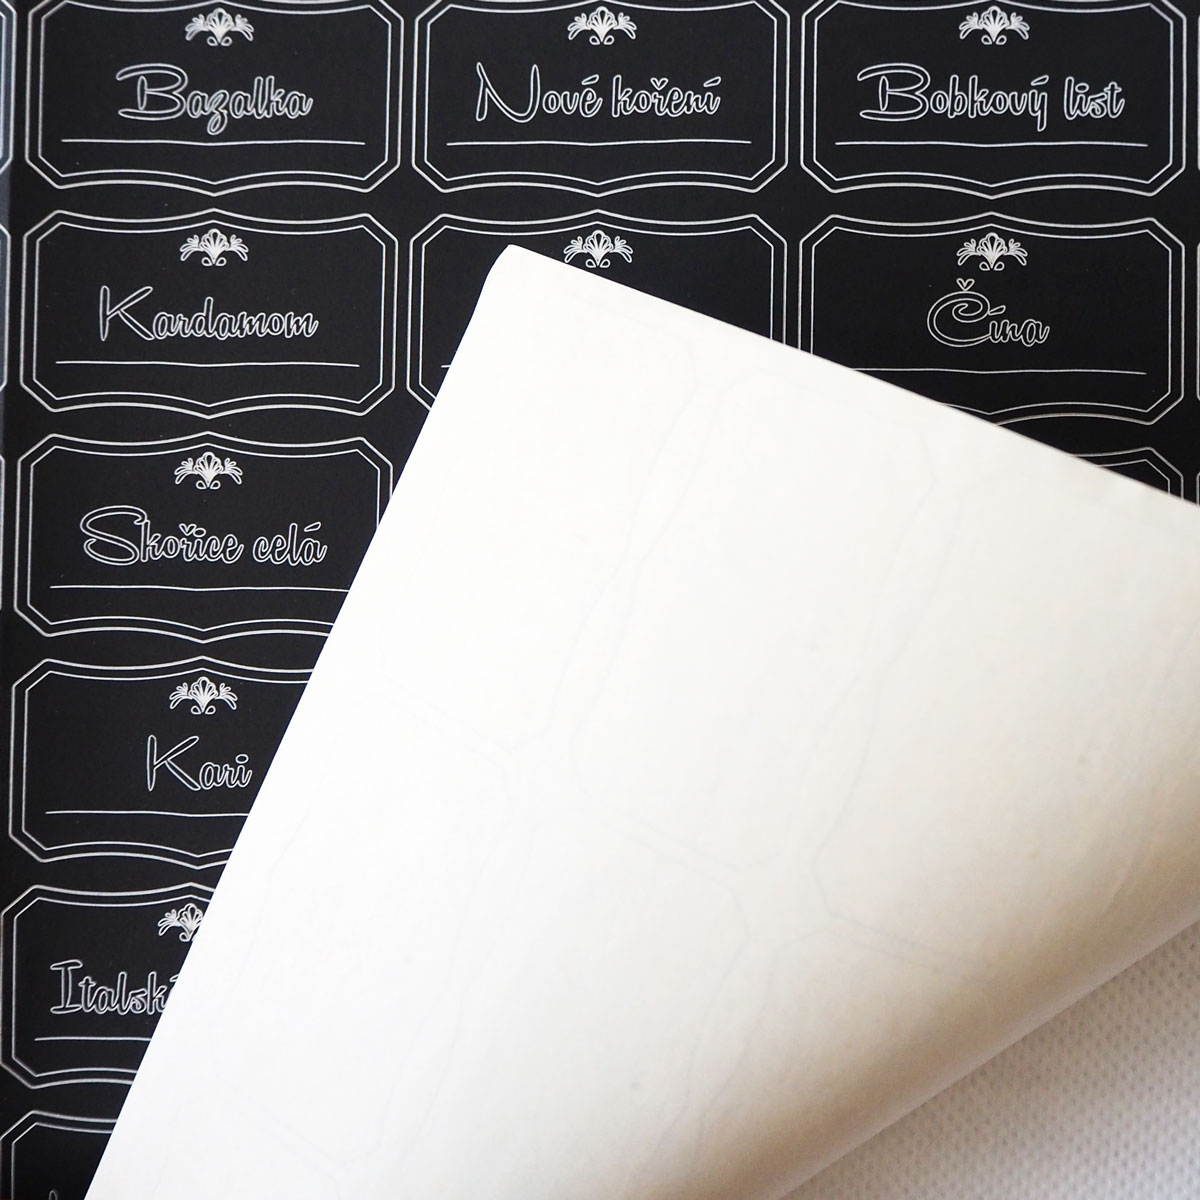 Self-adhesive paper for laser printers and copiers - 1000 sheets